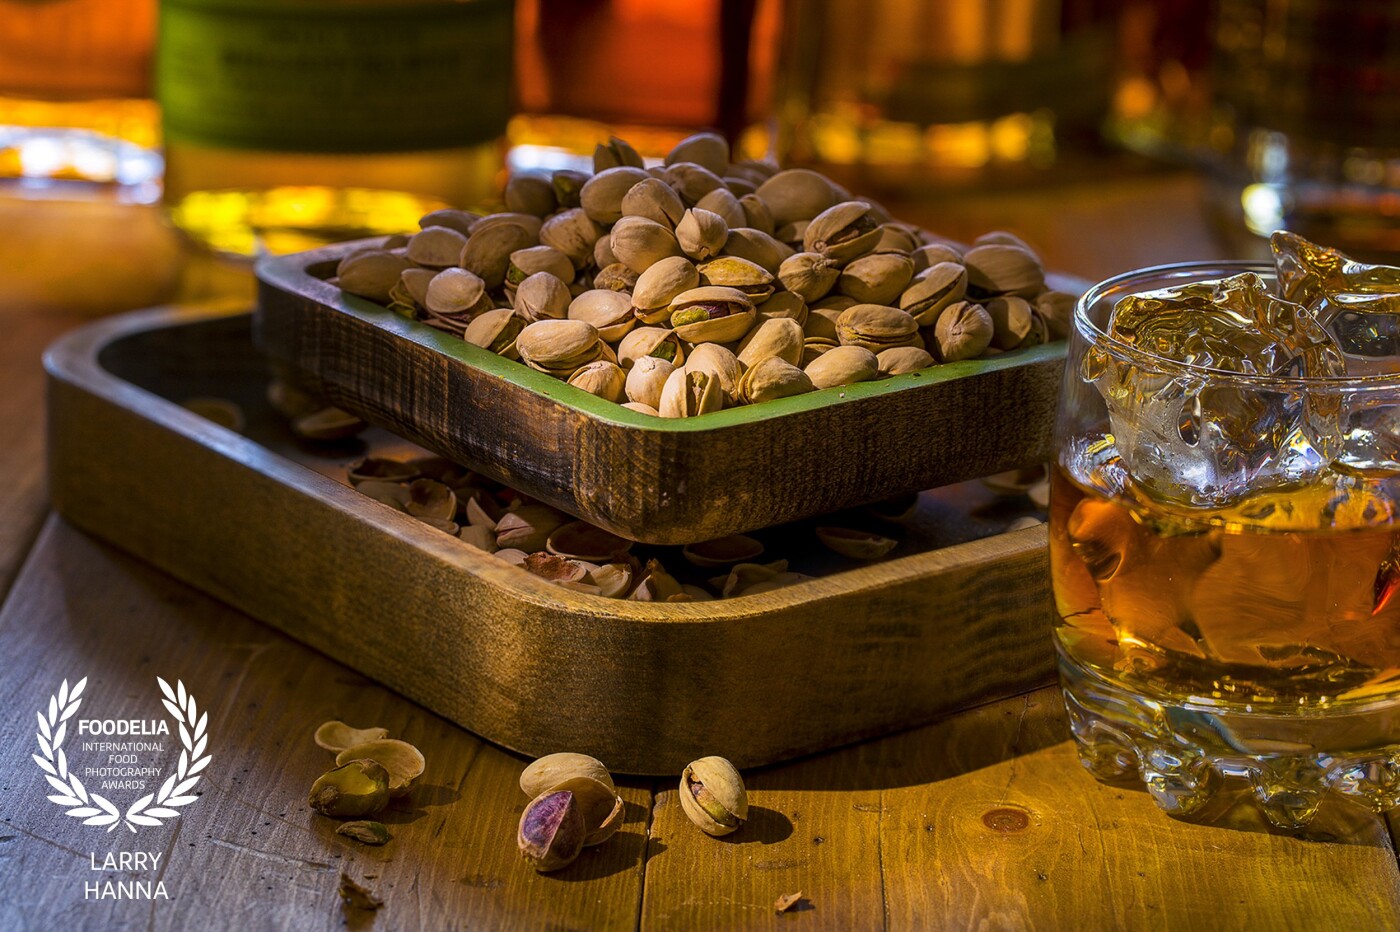 Two of my favorite things in the world are pistachios and Jack Daniels.  My wife gave me this cool pistachio dish for Christmas and thought it deserved to be photographed.